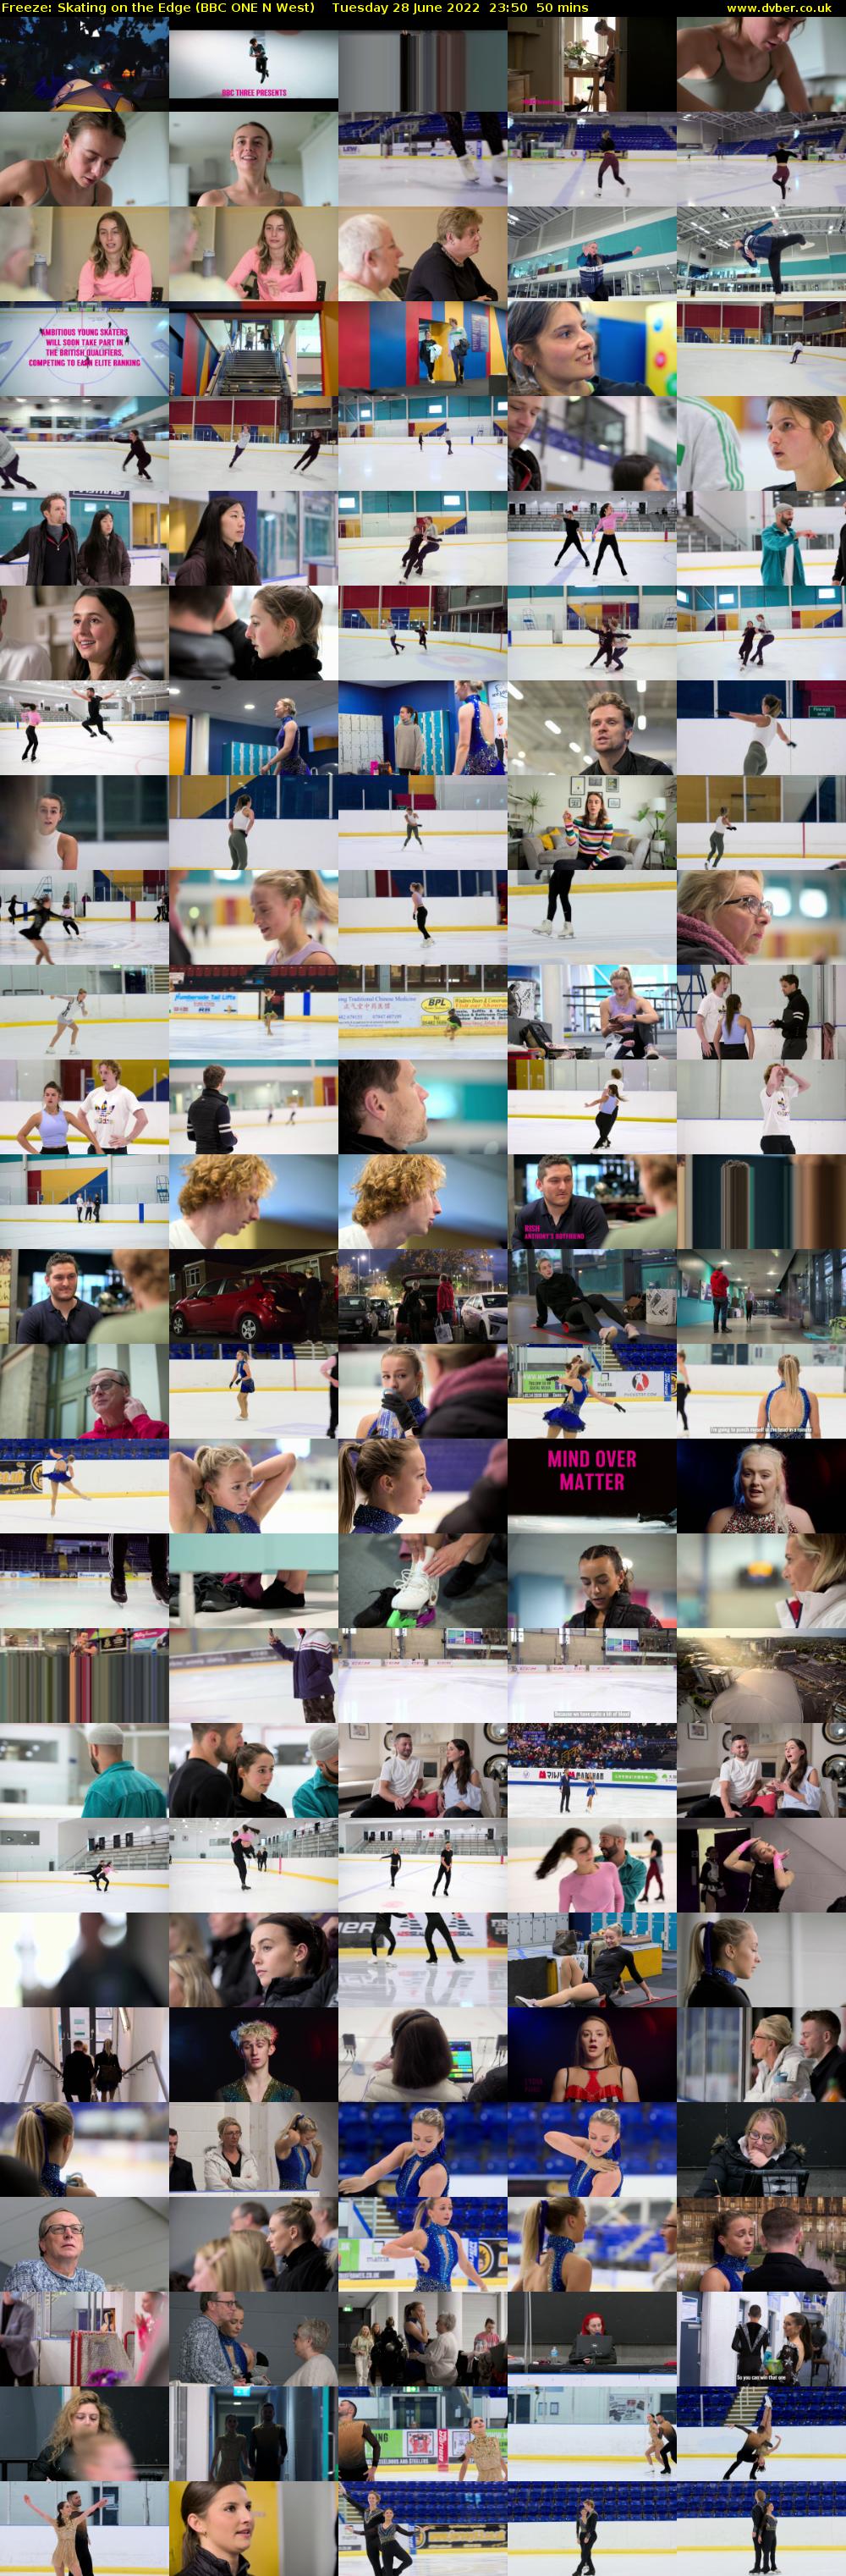 Freeze: Skating on the Edge (BBC ONE N West) Tuesday 28 June 2022 23:50 - 00:40